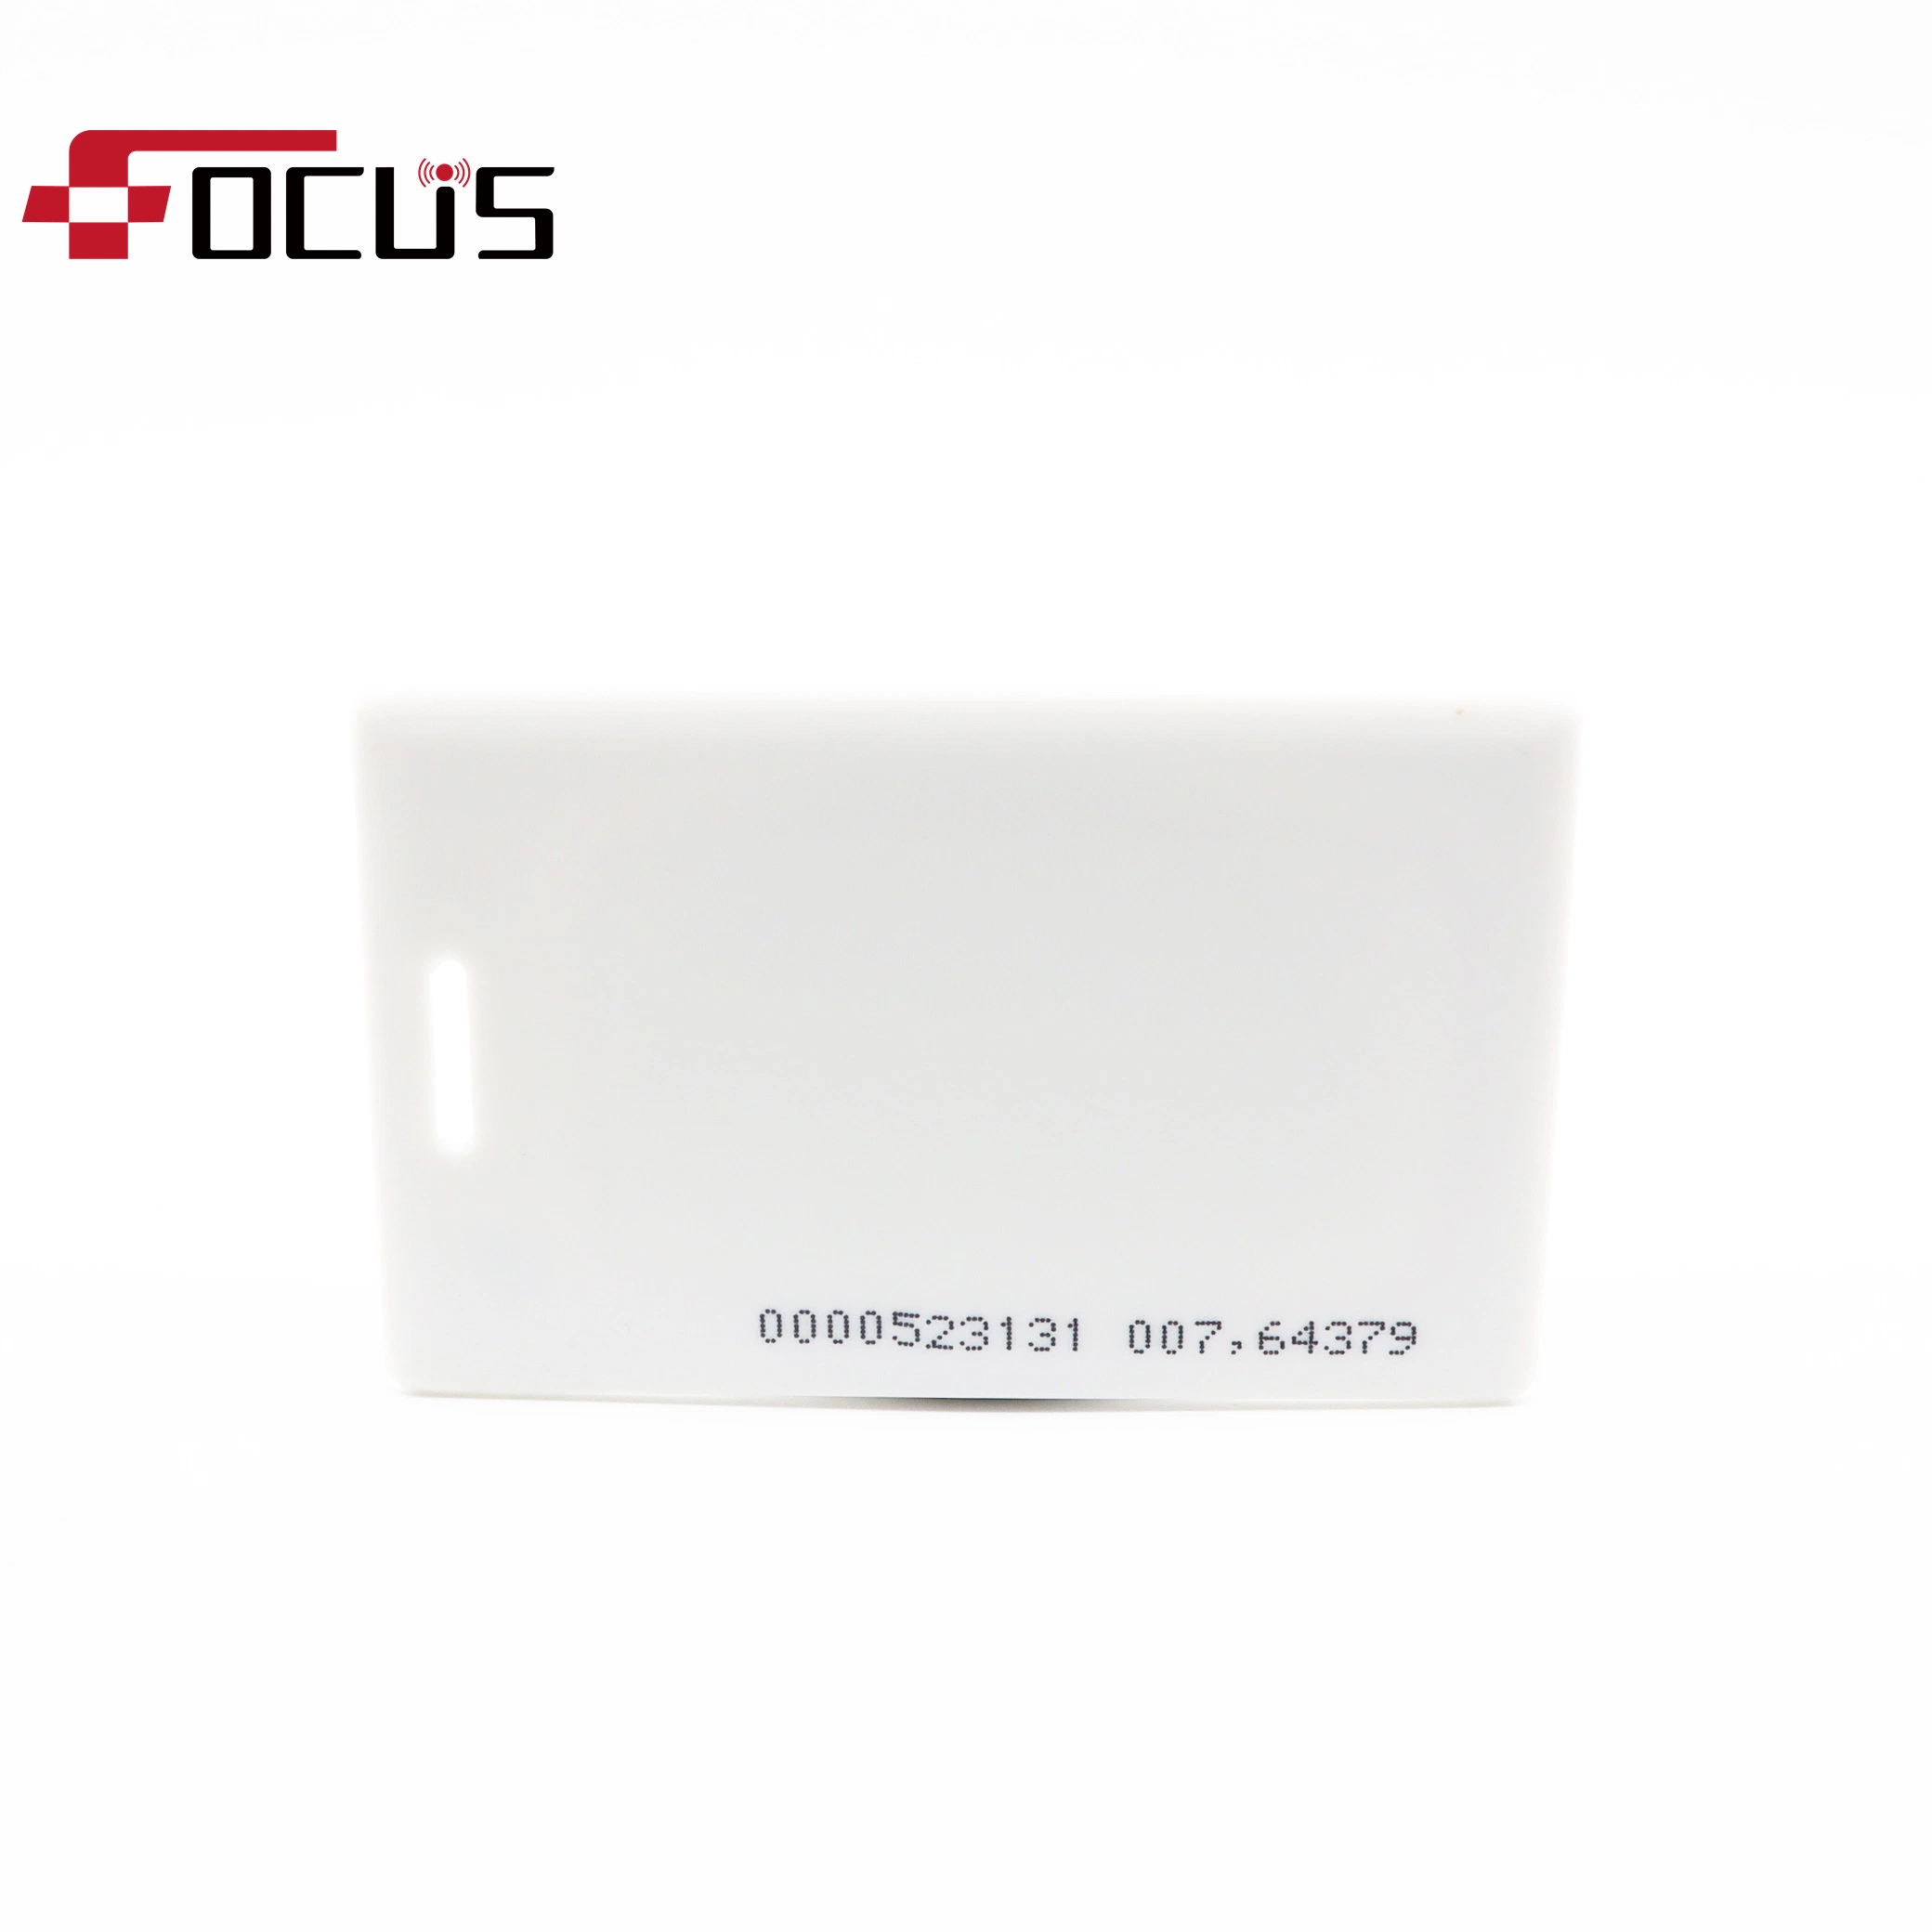 Full Color Printing RFID ID Thick Card for Promotion/Gift/Membership Card